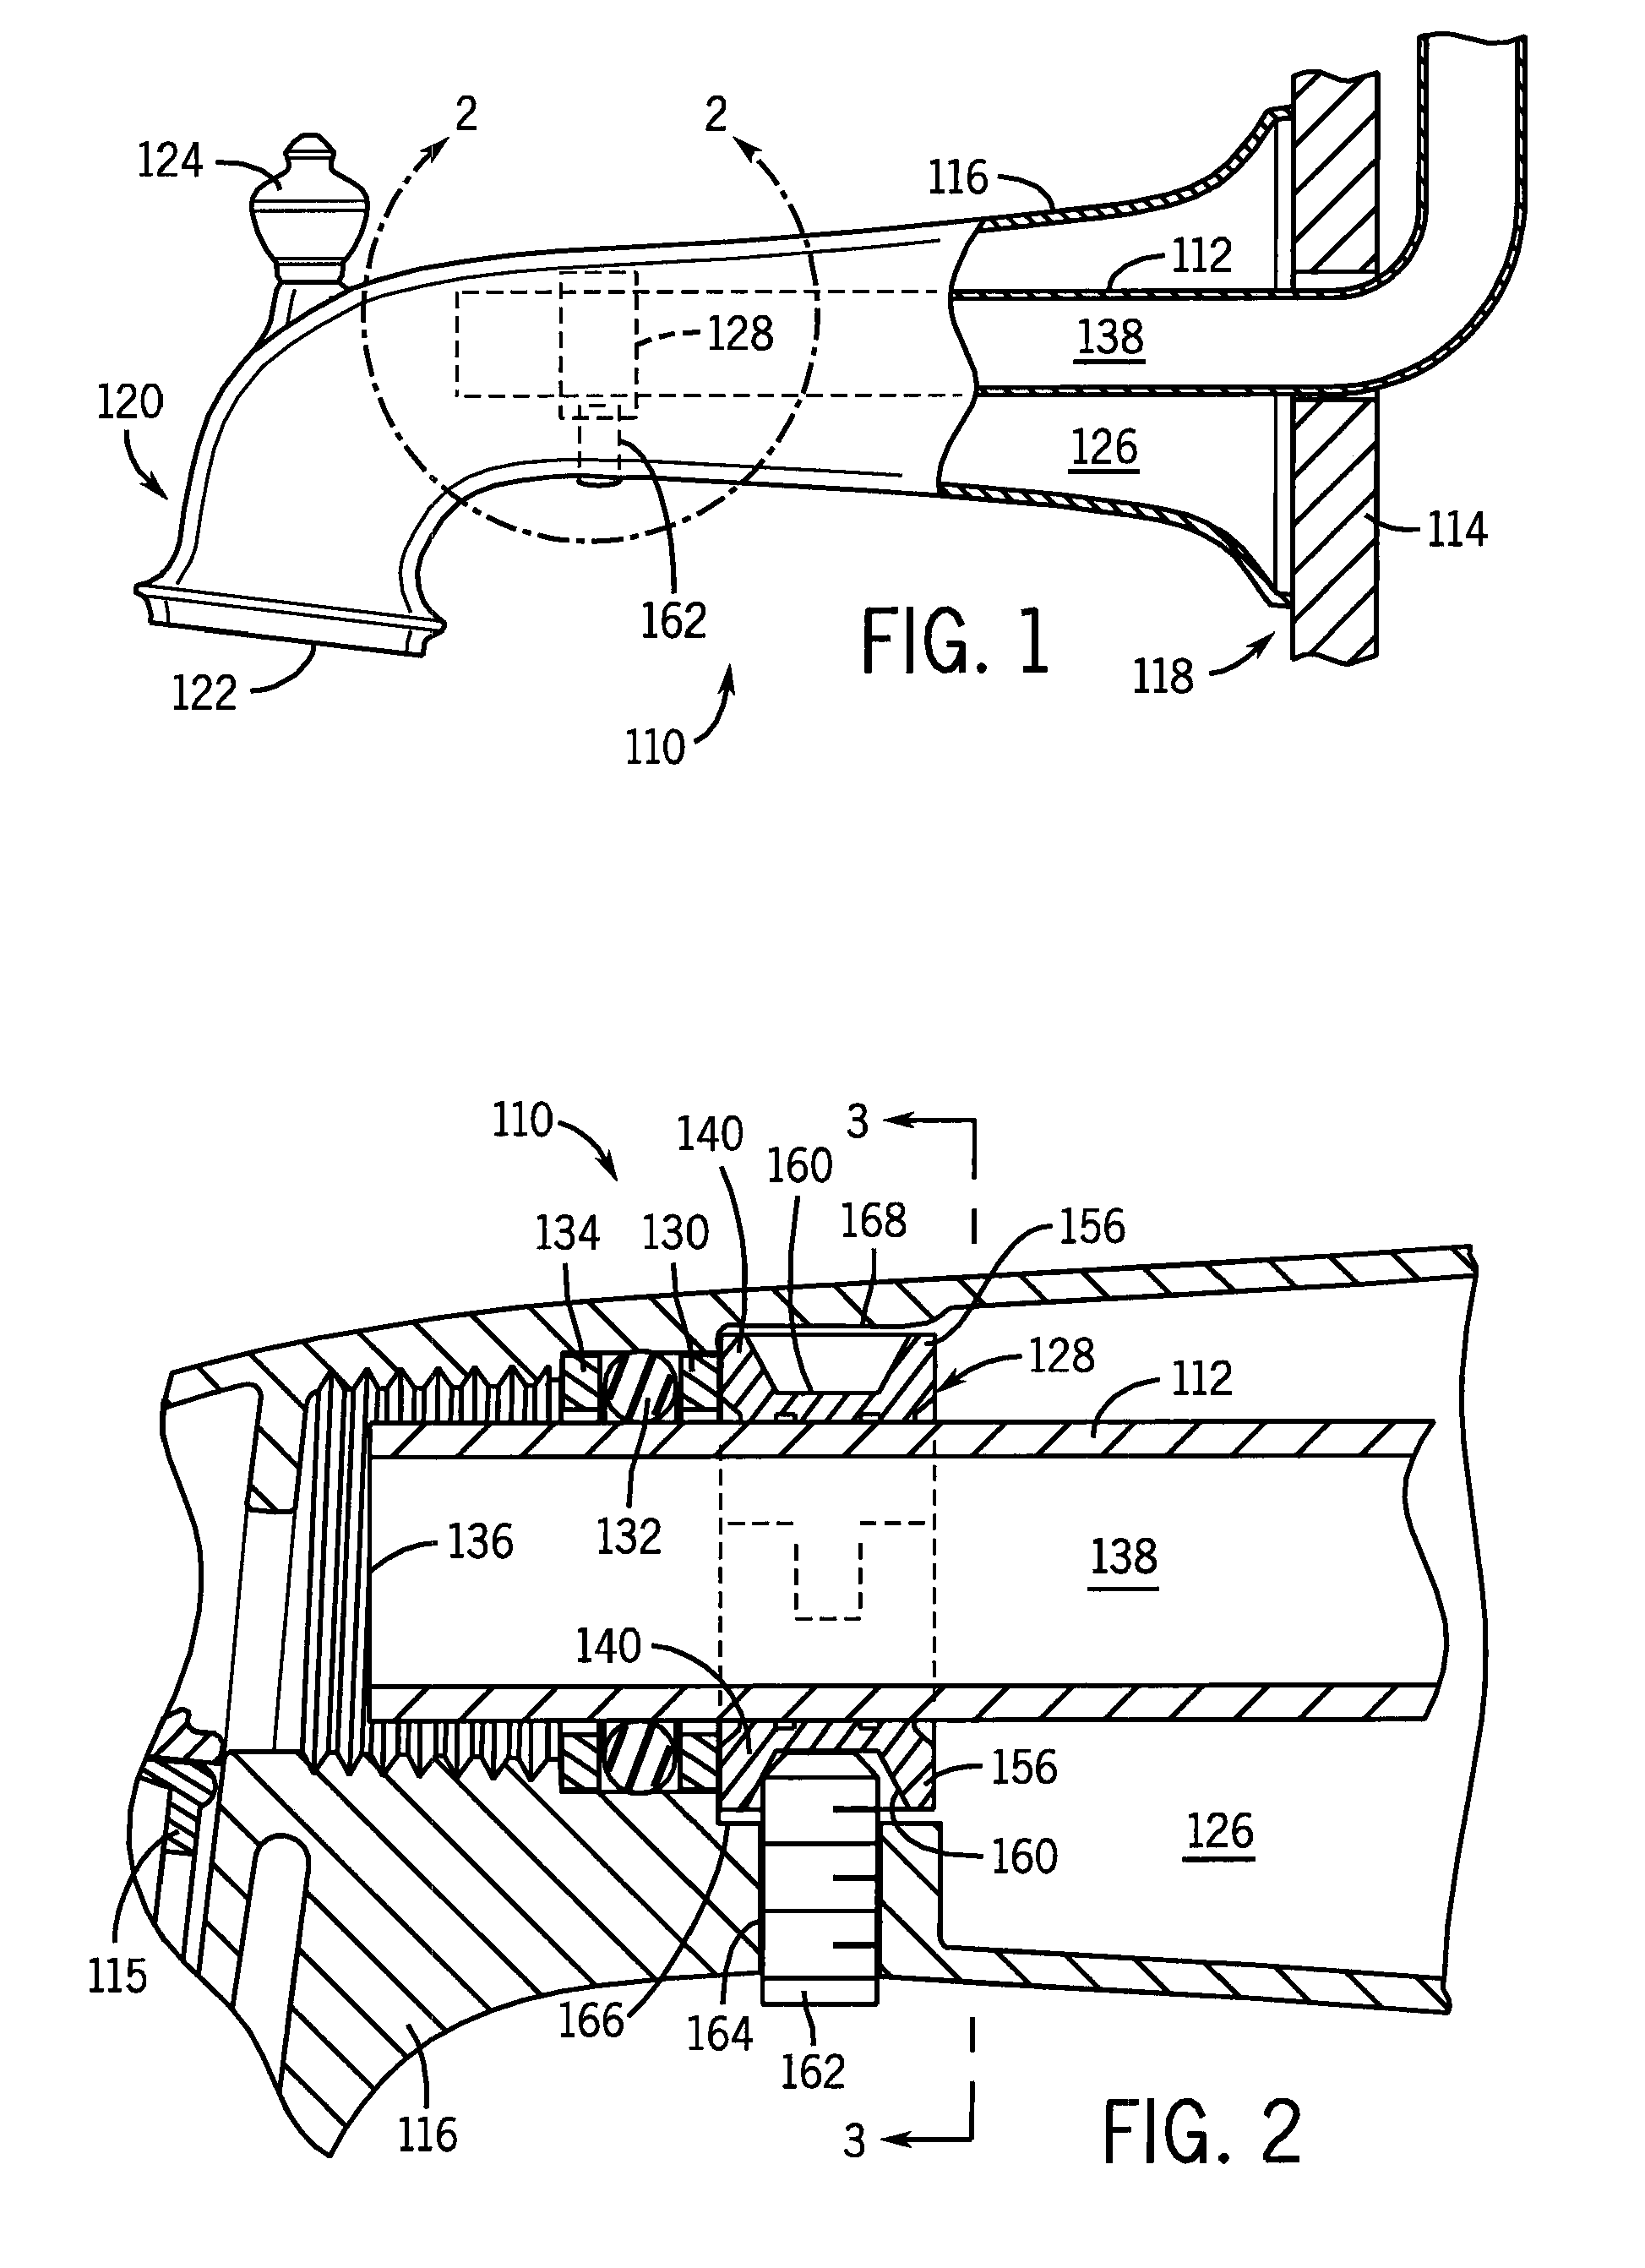 Slip-fit clamping system for mounting a fitting on a wall